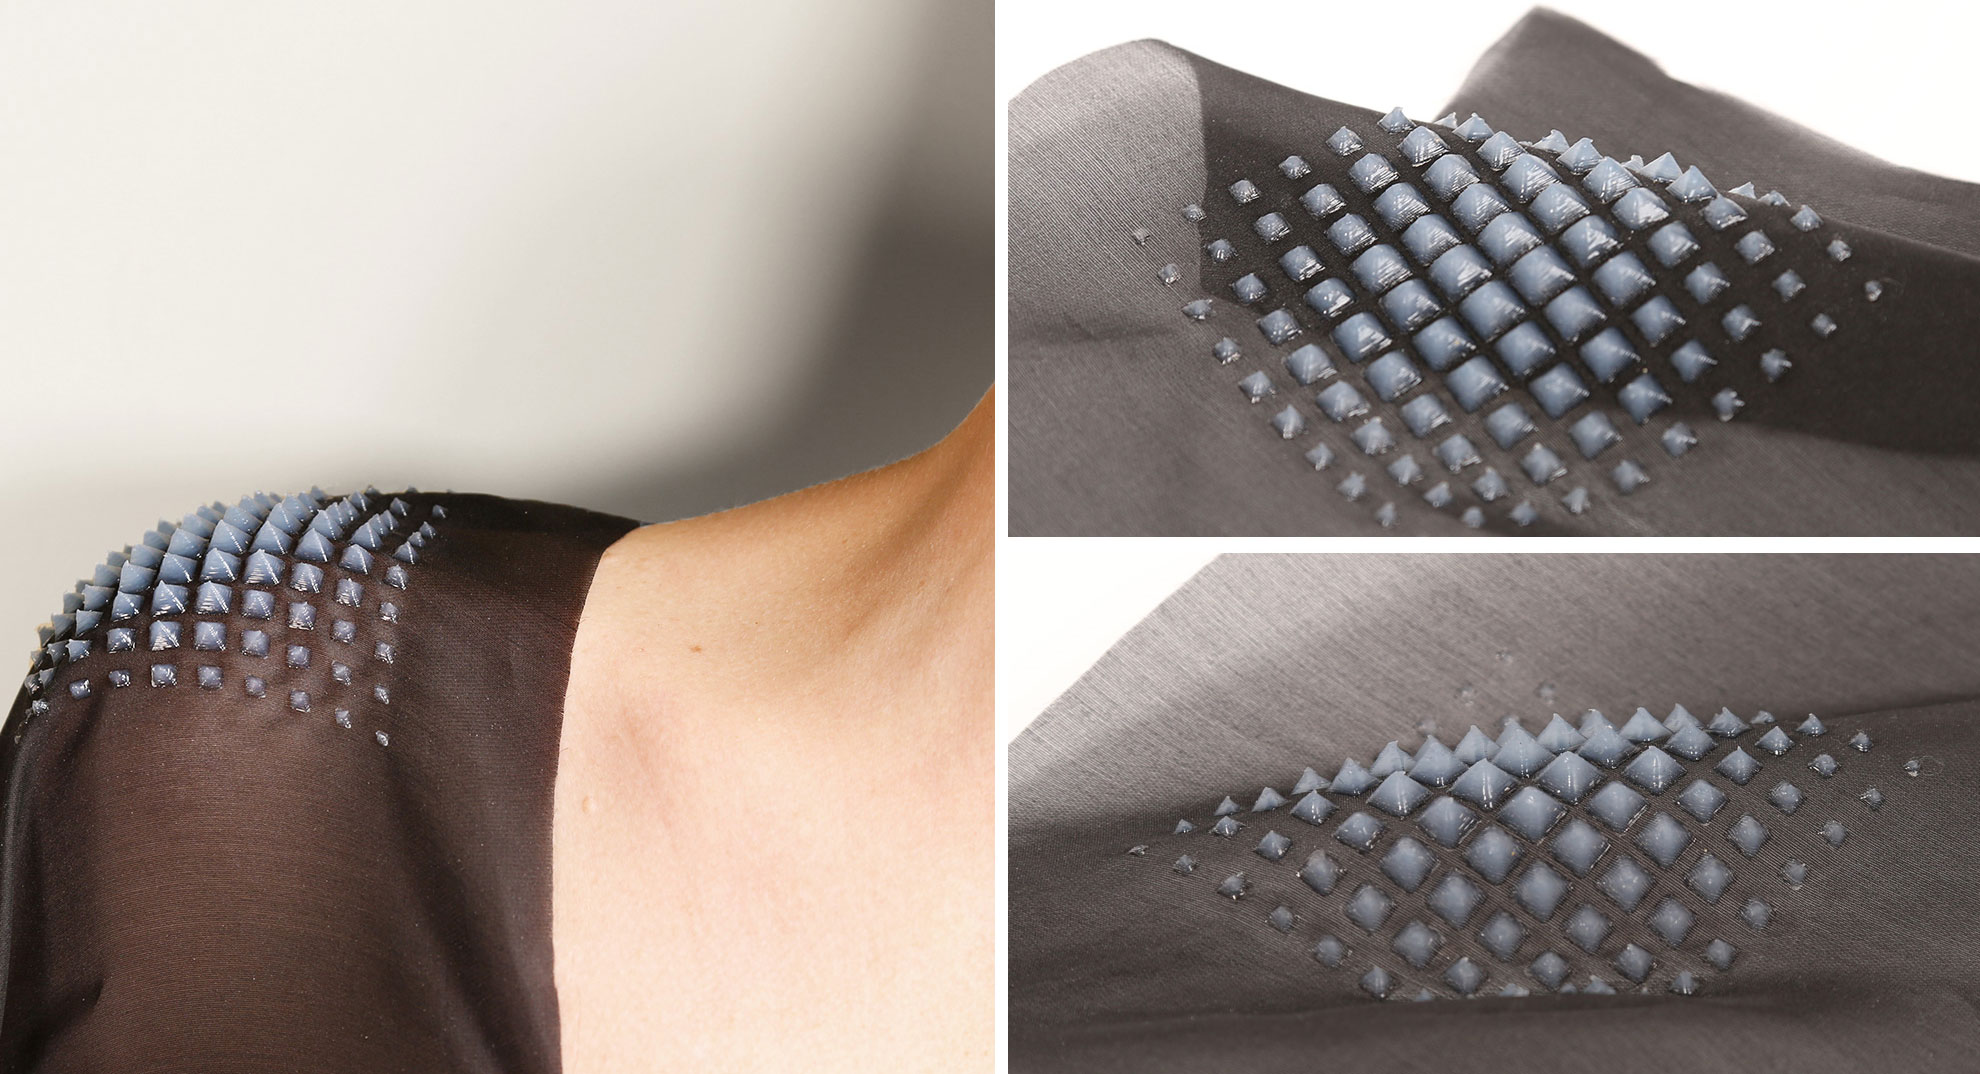 silicone 3D printing in fashion